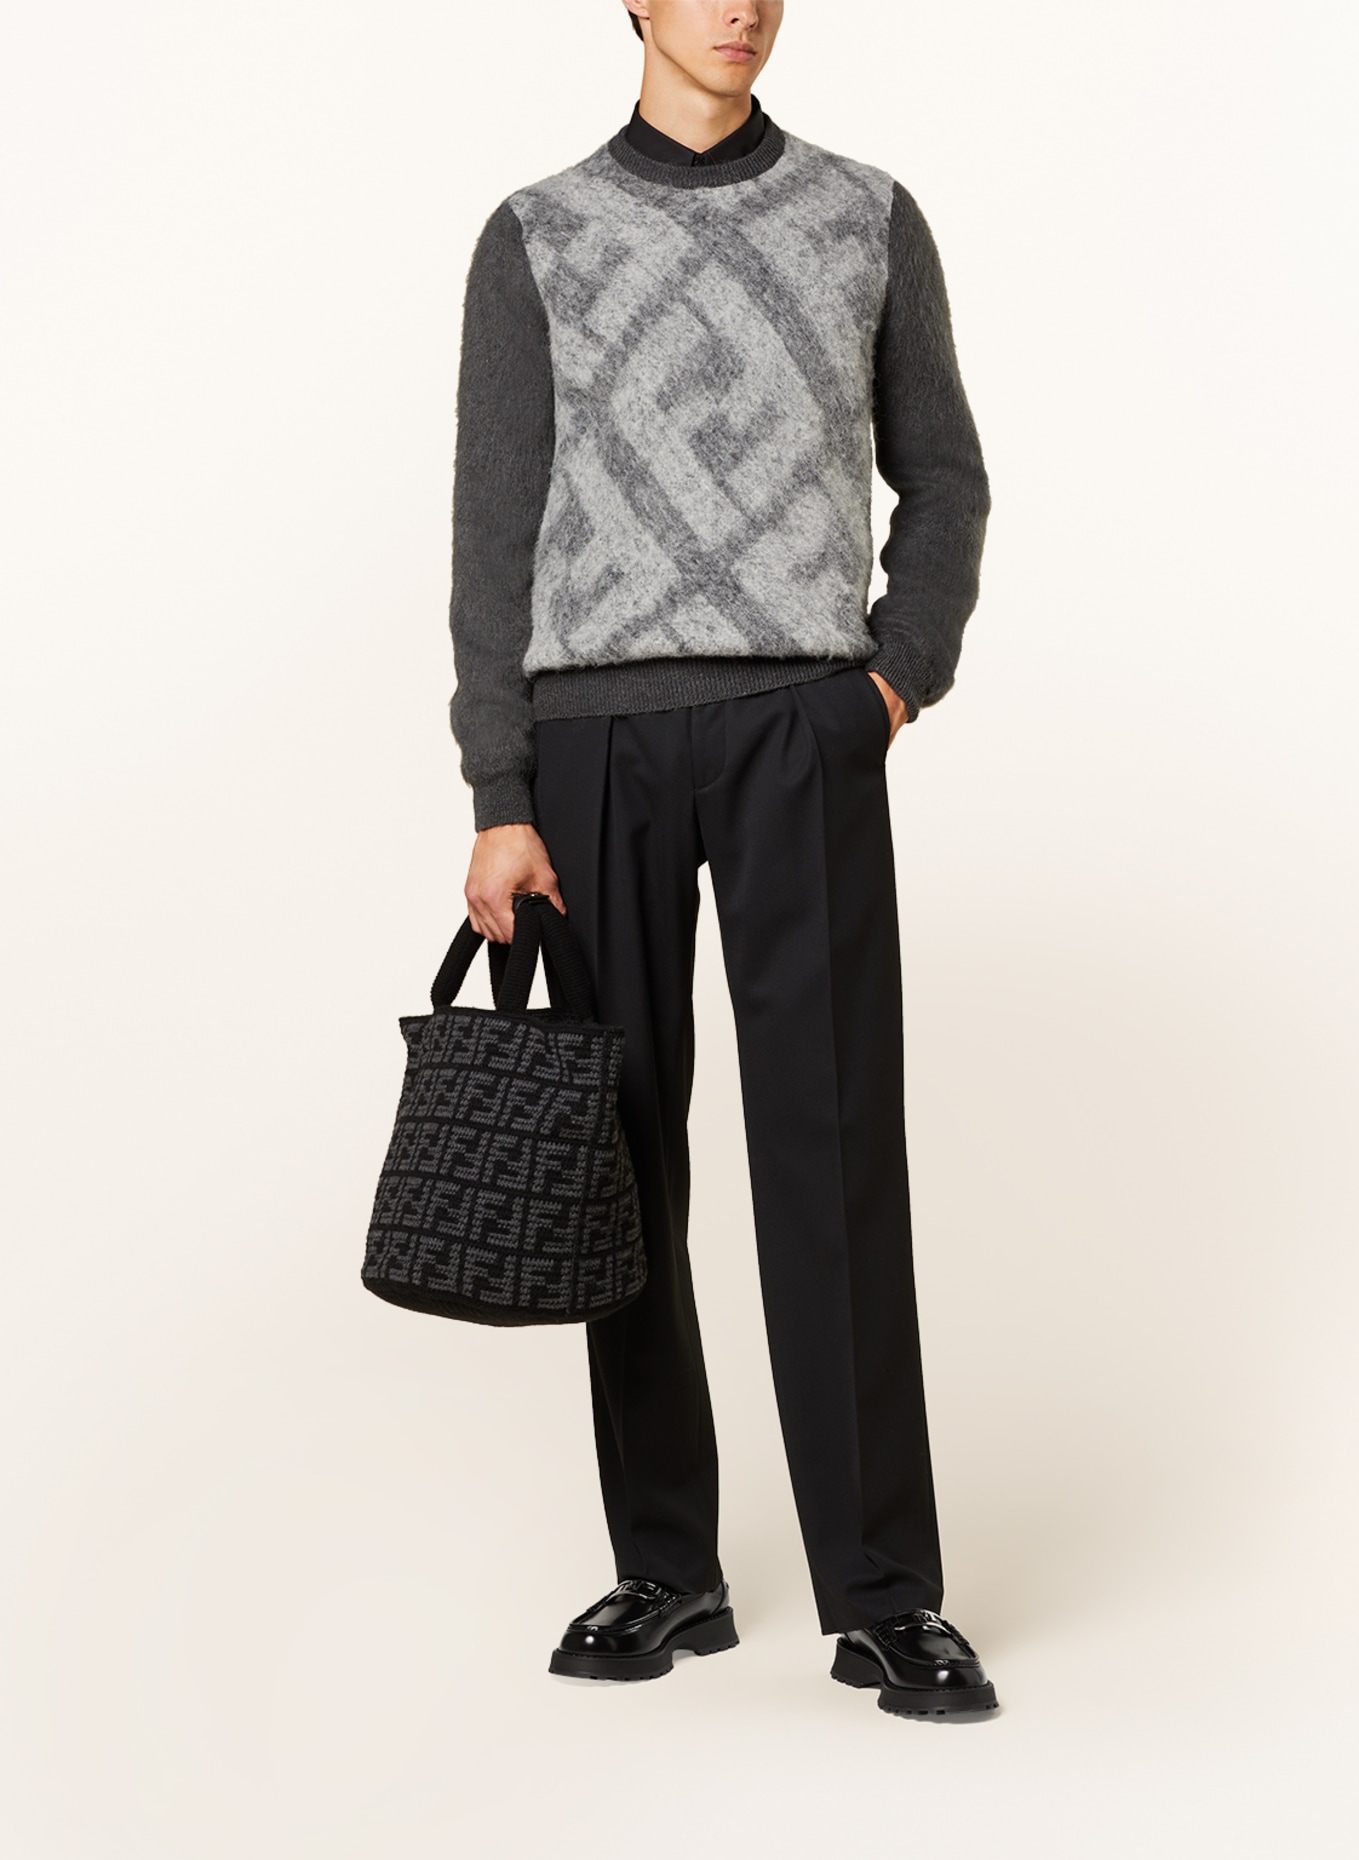 FENDI Sweater with mohair, Color: GRAY/ LIGHT GRAY (Image 2)